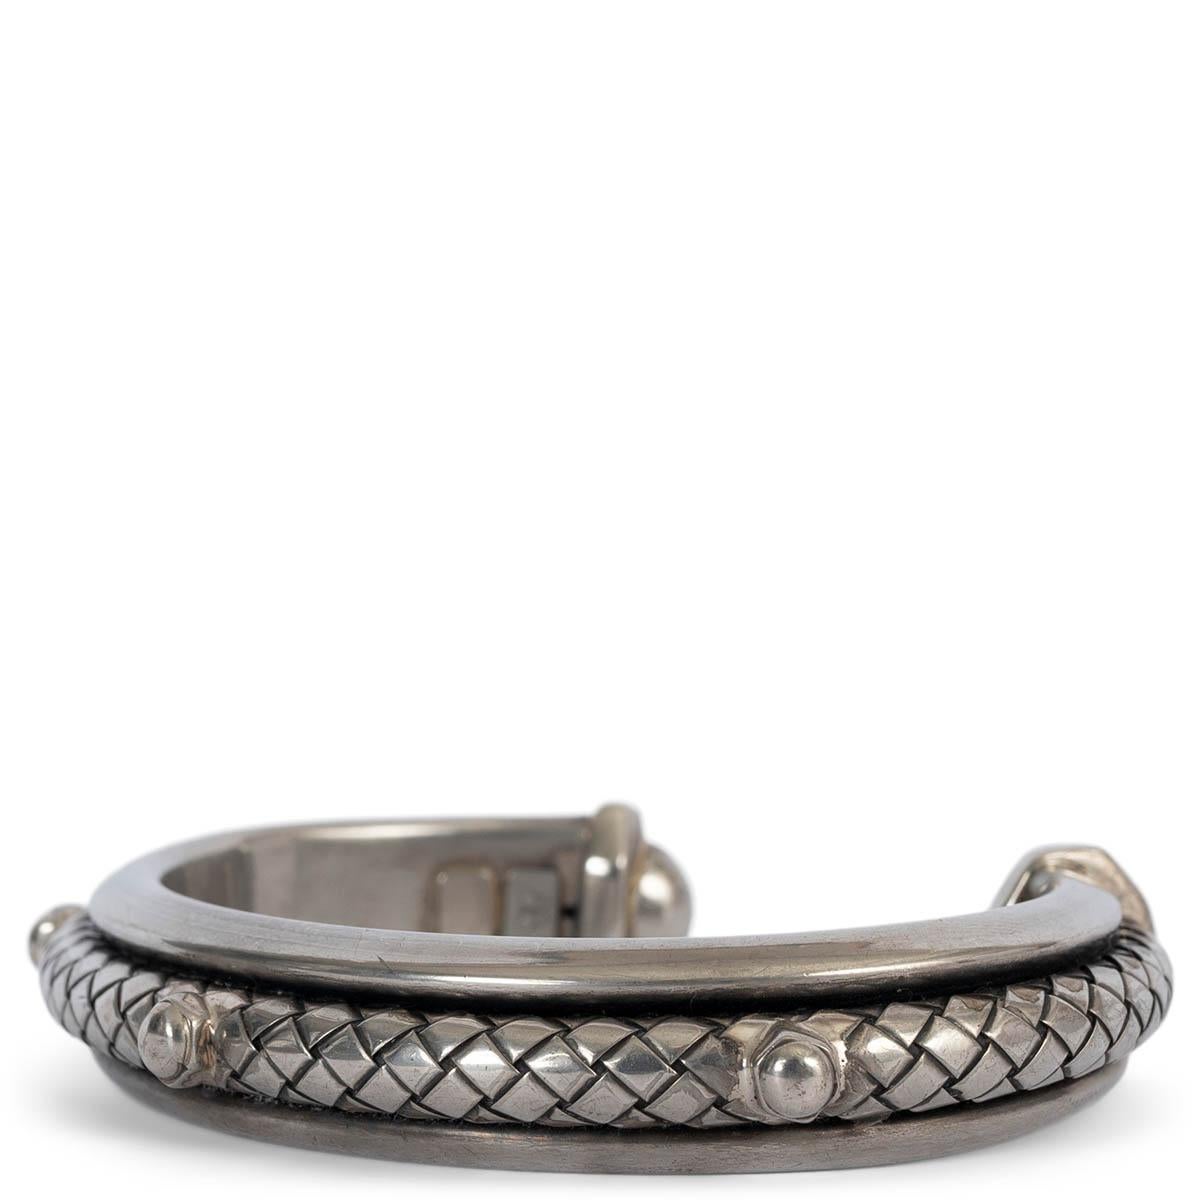 100% authentic Bottega Veneta Intrecciato cuff in antiqued sterling silver with hand woven second layer and rivets. Has been worn and is in excellent condition. 

Measurements
Width	1.3cm (0.5in)
Circumference	16cm (6.2in)

All our listings include